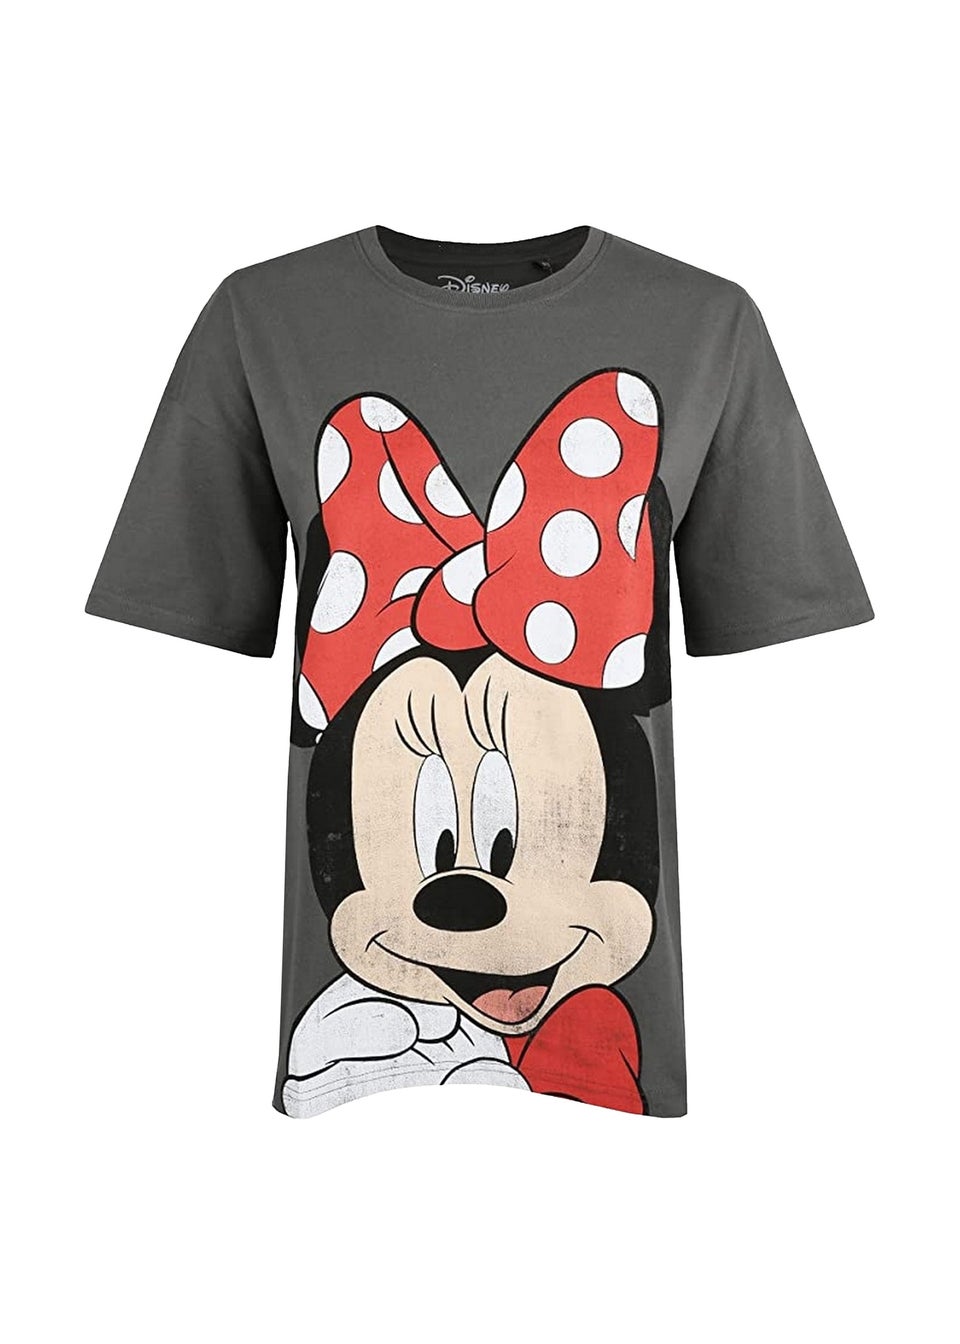 Disney Charcoal Grey Minnie Mouse Smile T-Shirt